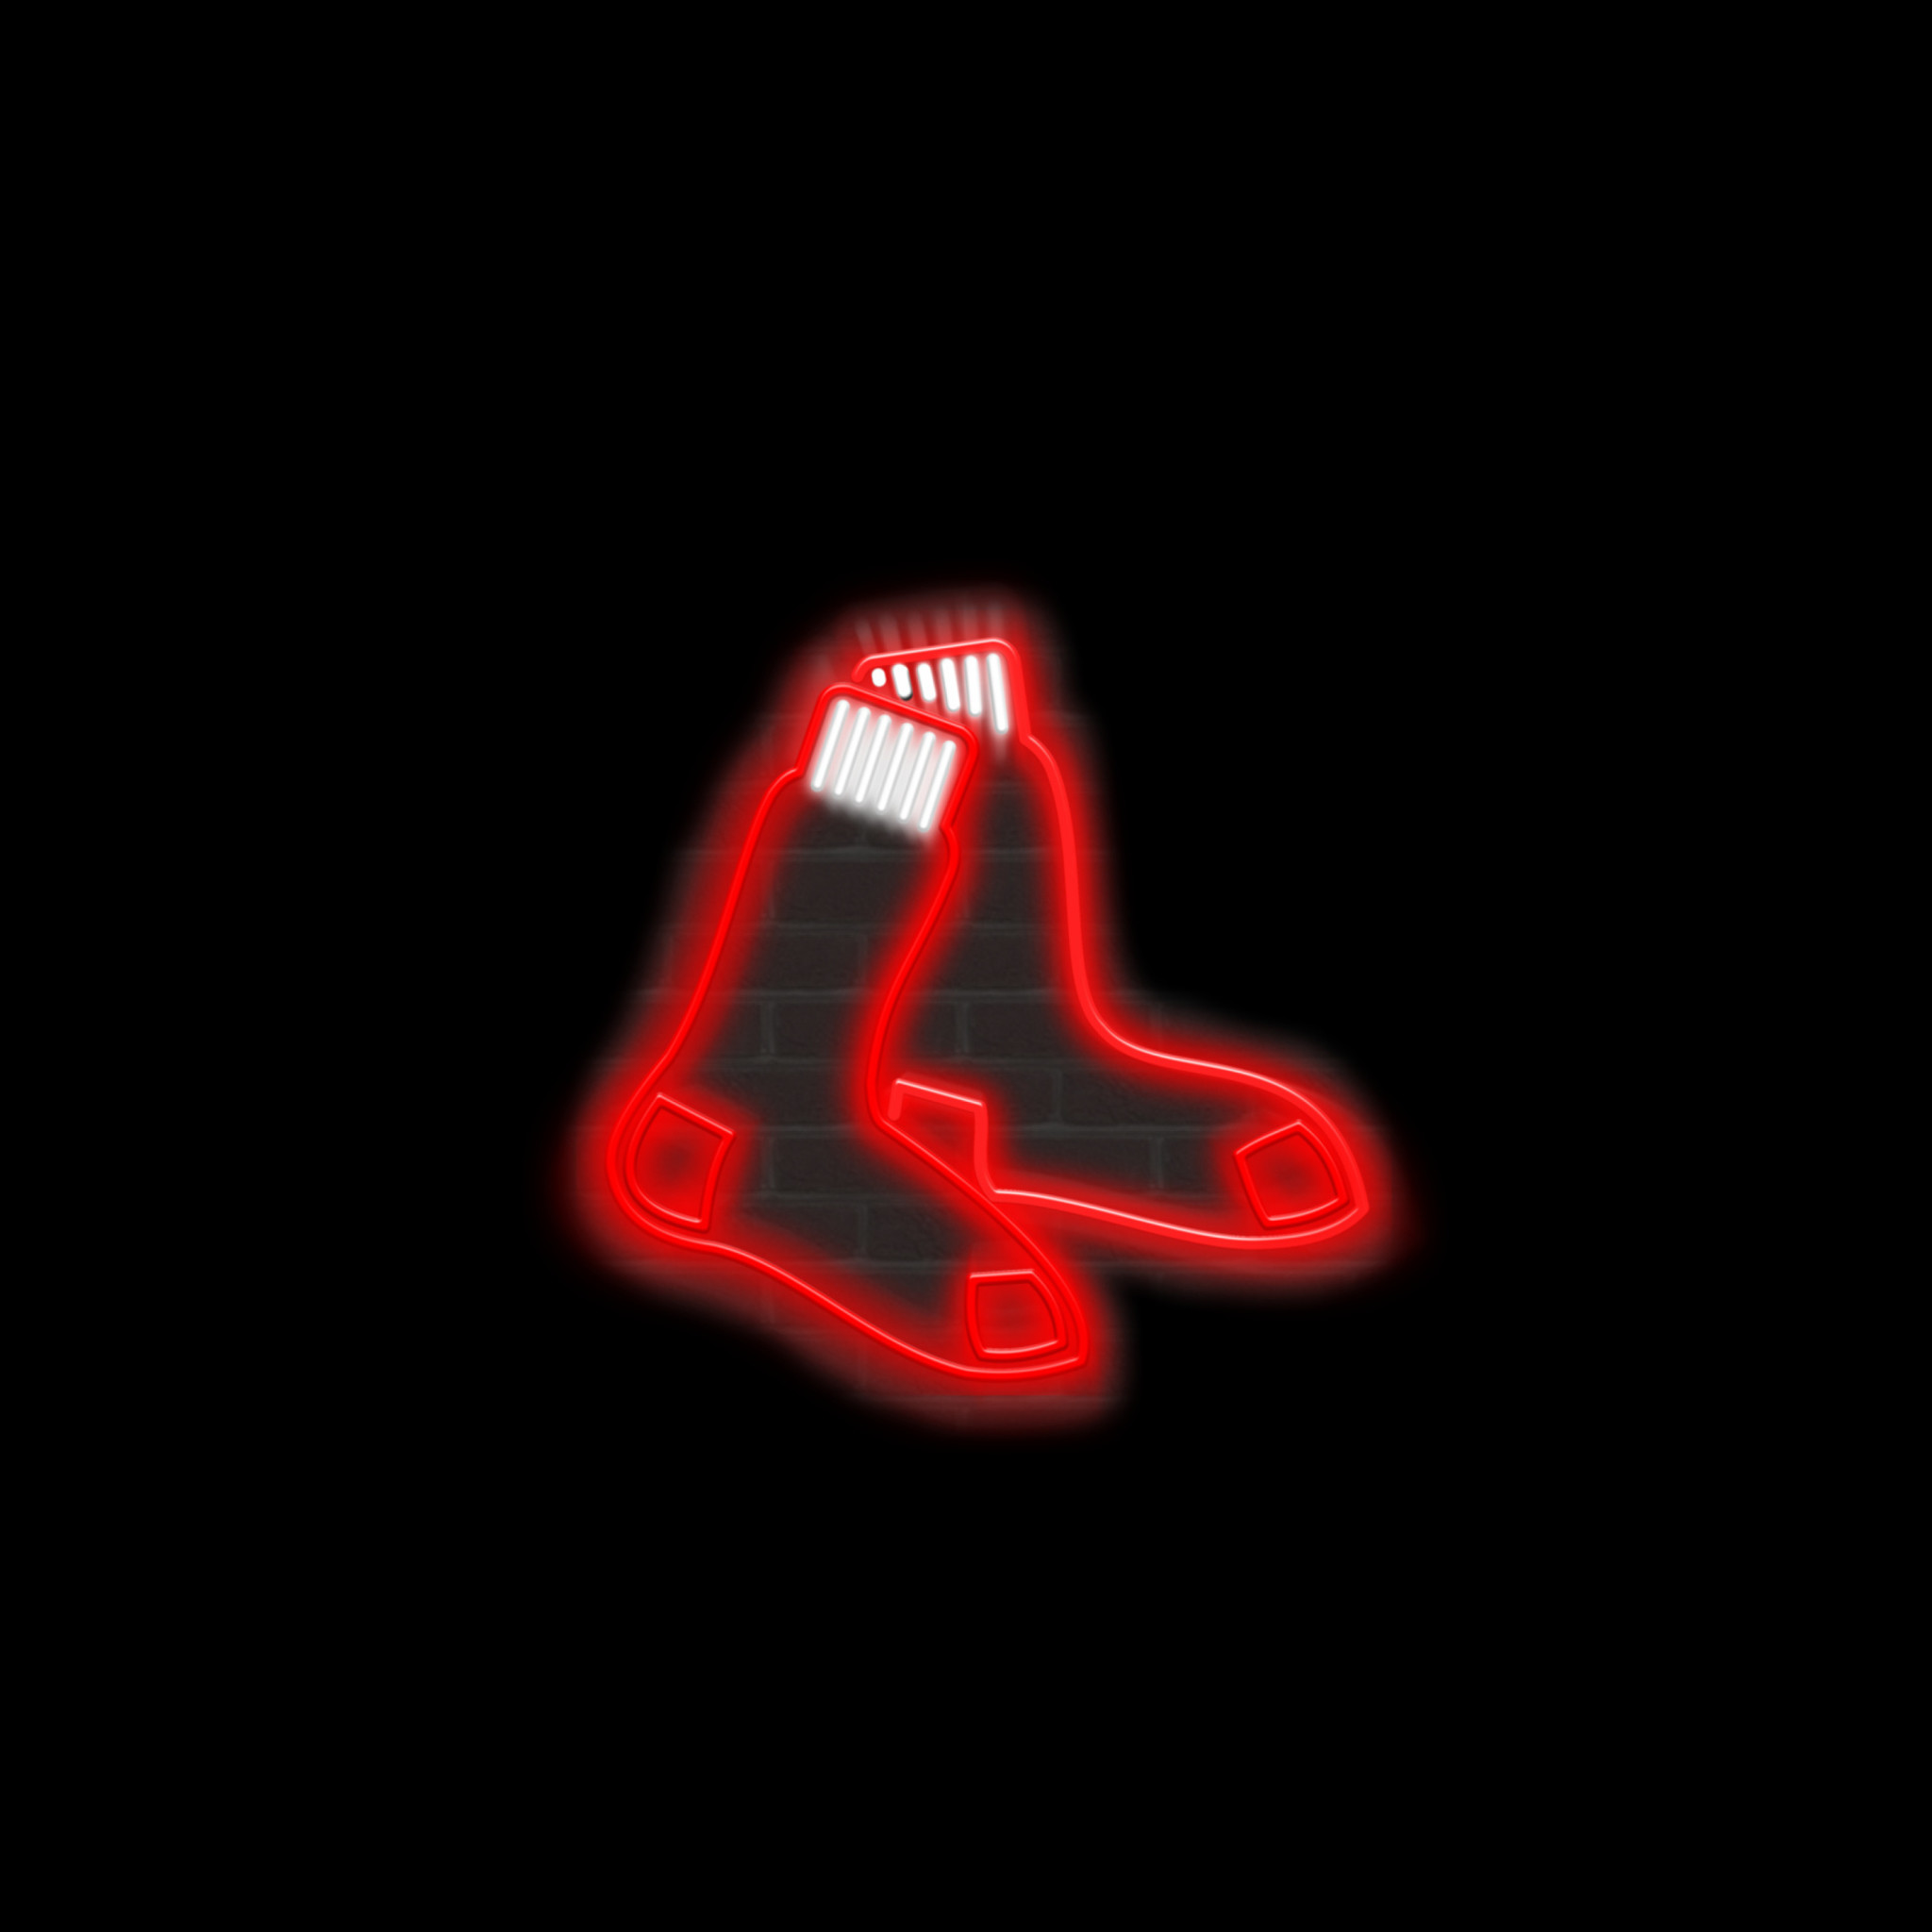 2048x2048 HQFX Creative Boston Red Sox Pictures